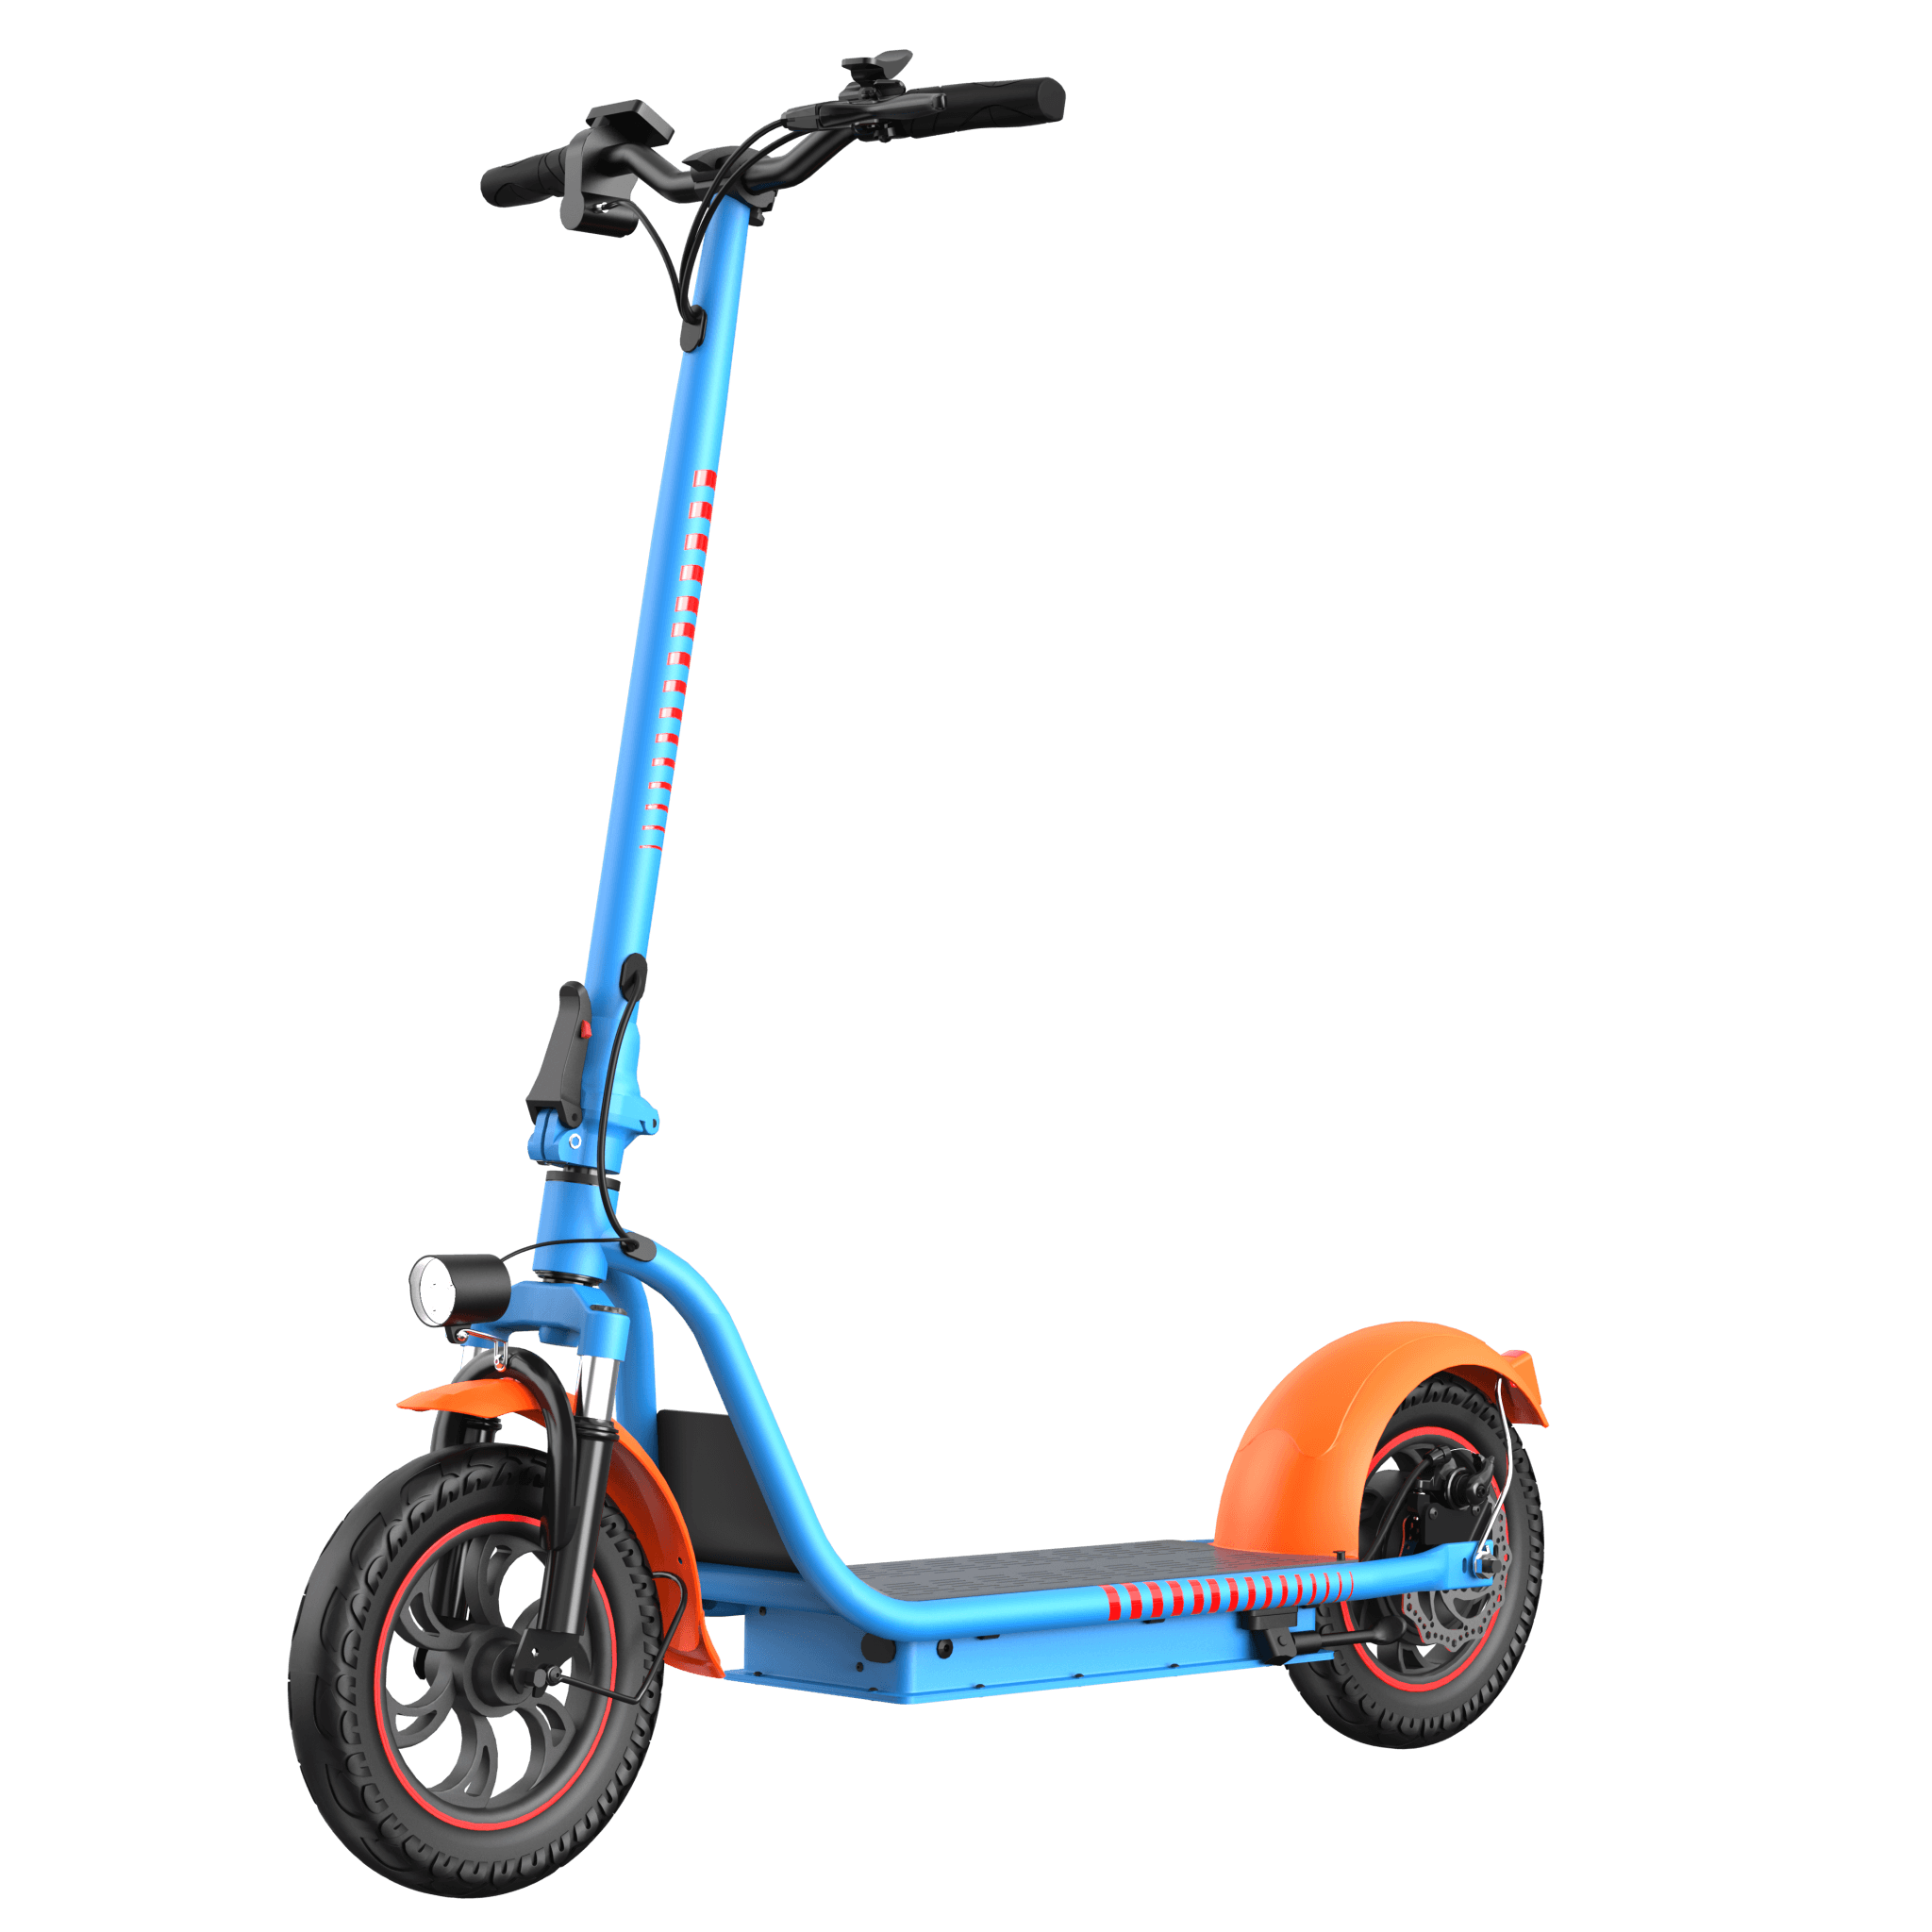 Marvel Touhou Opførsel Powerful 500W Foldable E-Scooter Max Speed 22 Mph w/ App Control for A –  Gadfever